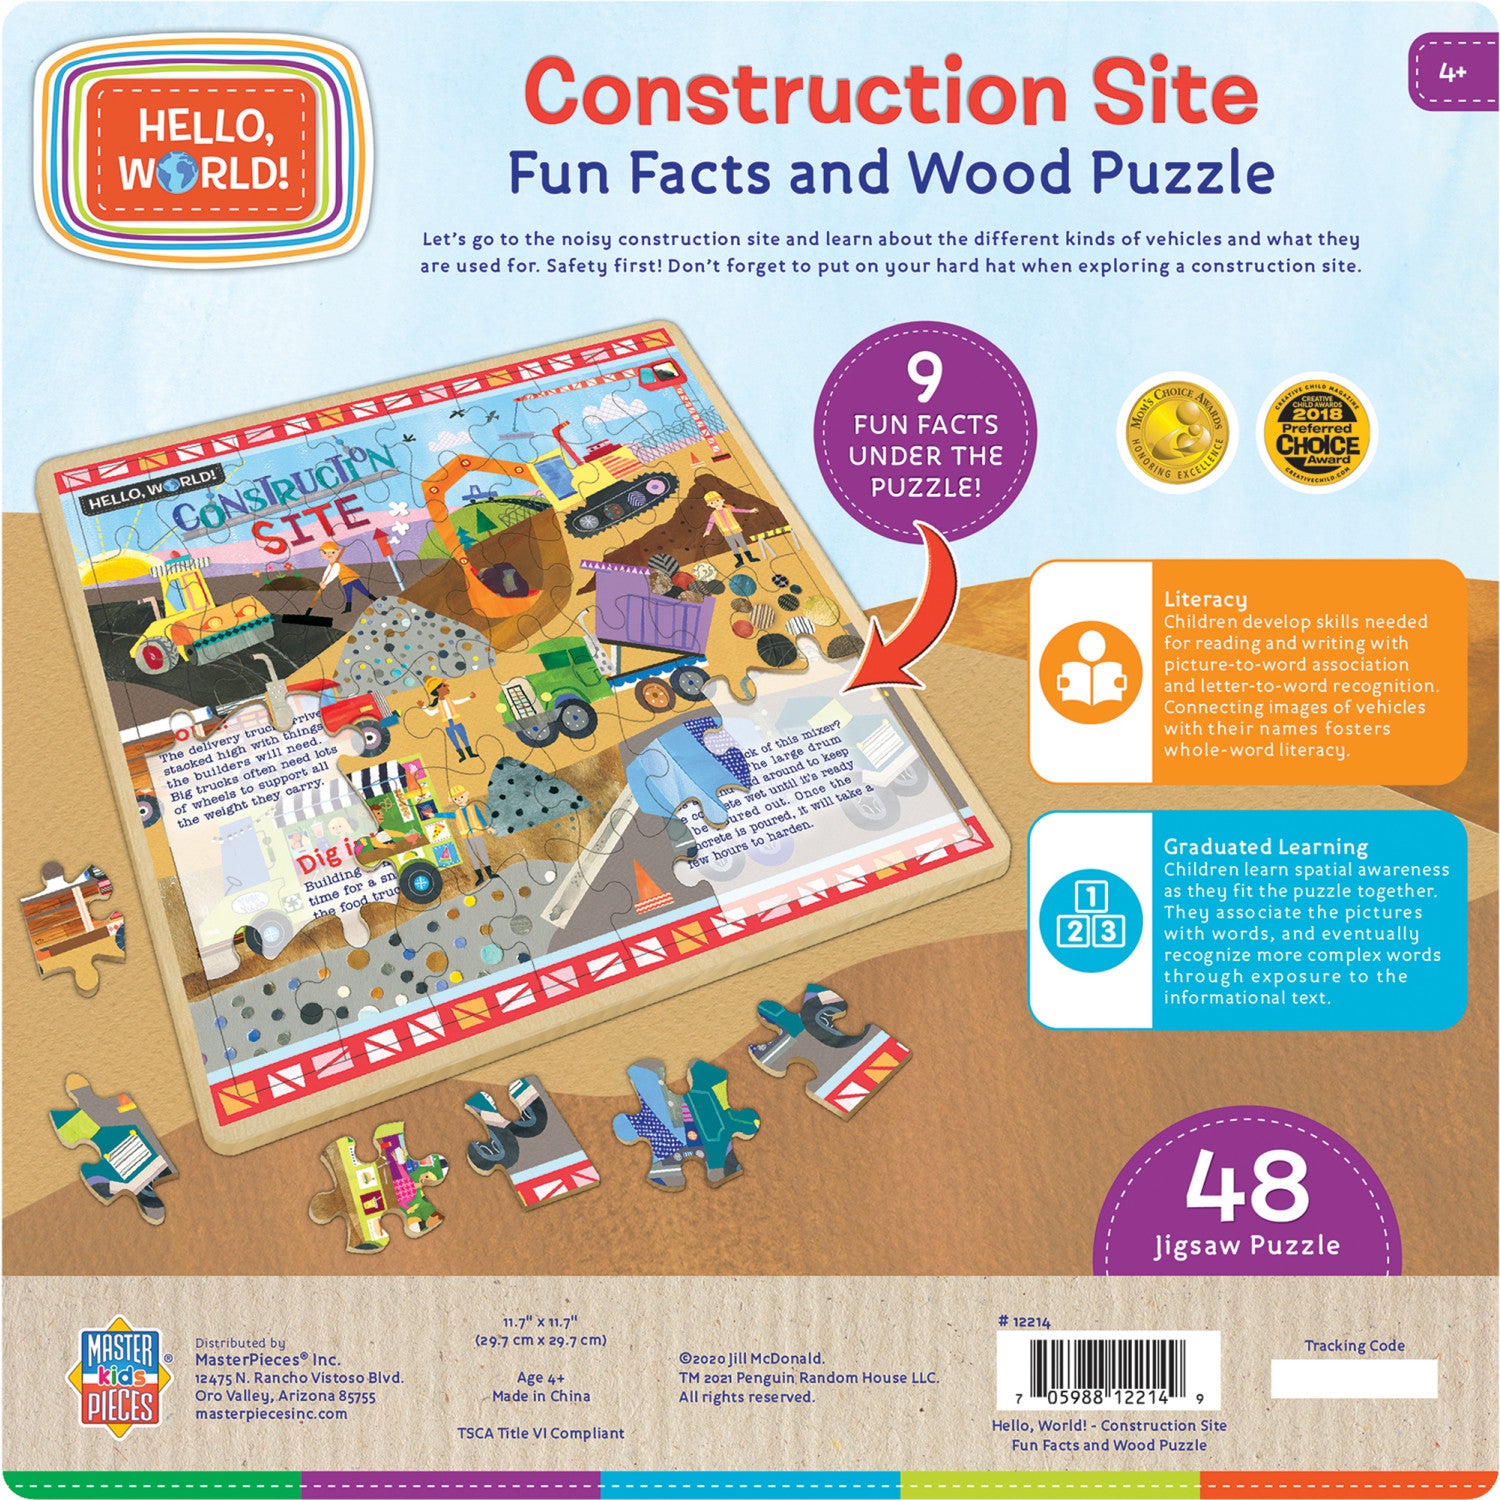 Hello, World! - Construction Site 48 Piece Wood Jigsaw Puzzle